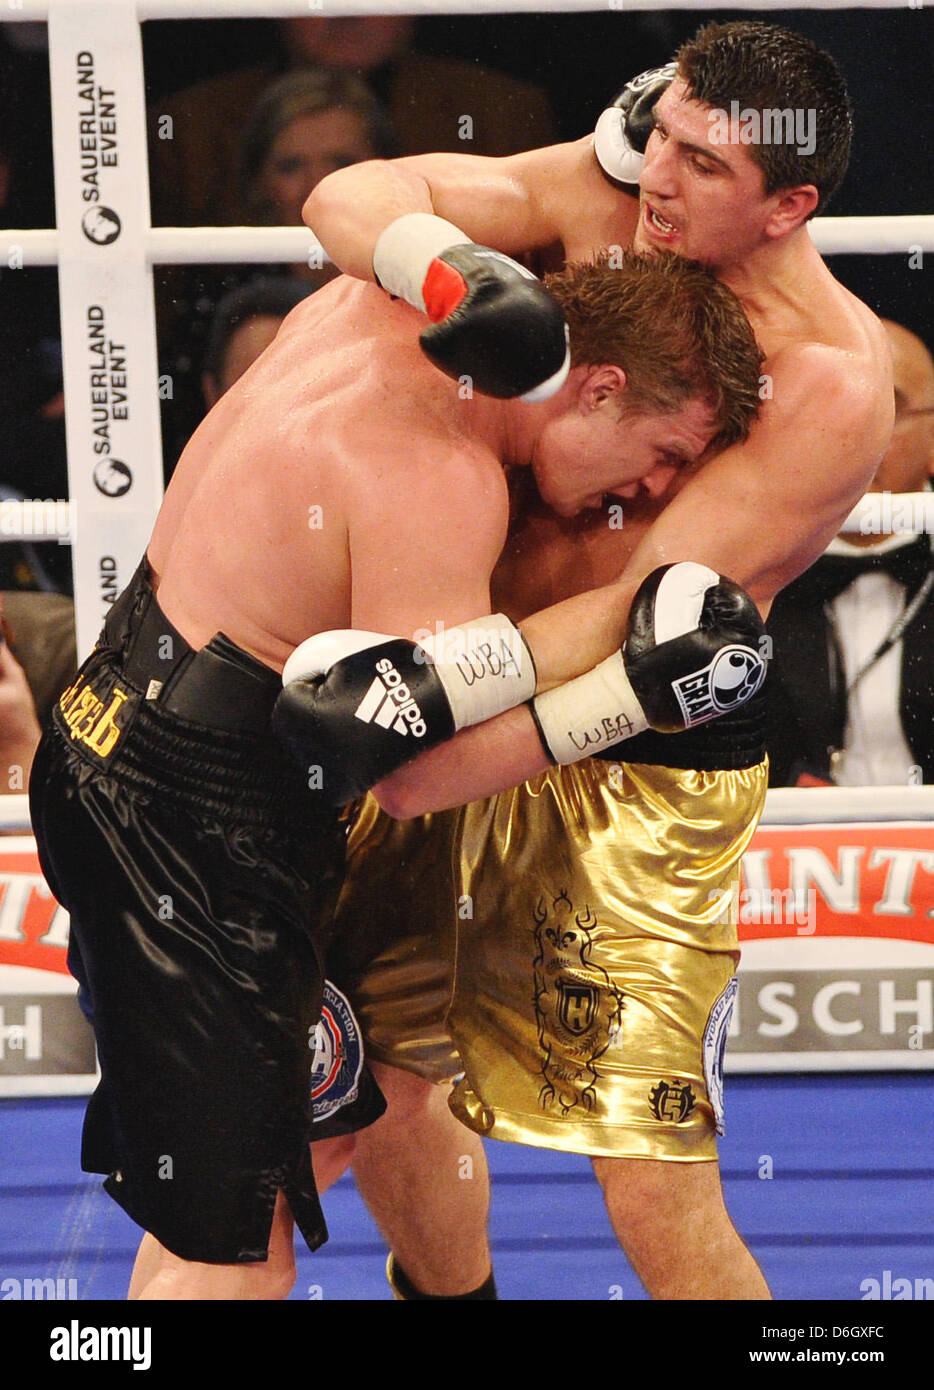 German boxer Marco Huck (R) fights against Russian boxer Alexander Povetkin during the WBA world heavyweight boxing championship match at the Porsche-Arena in Stuttgart, Germany, 25 February 2012. Povetkin won the heavyweight title by majority decision. Photo: Jan-Philipp Strobel Stock Photo